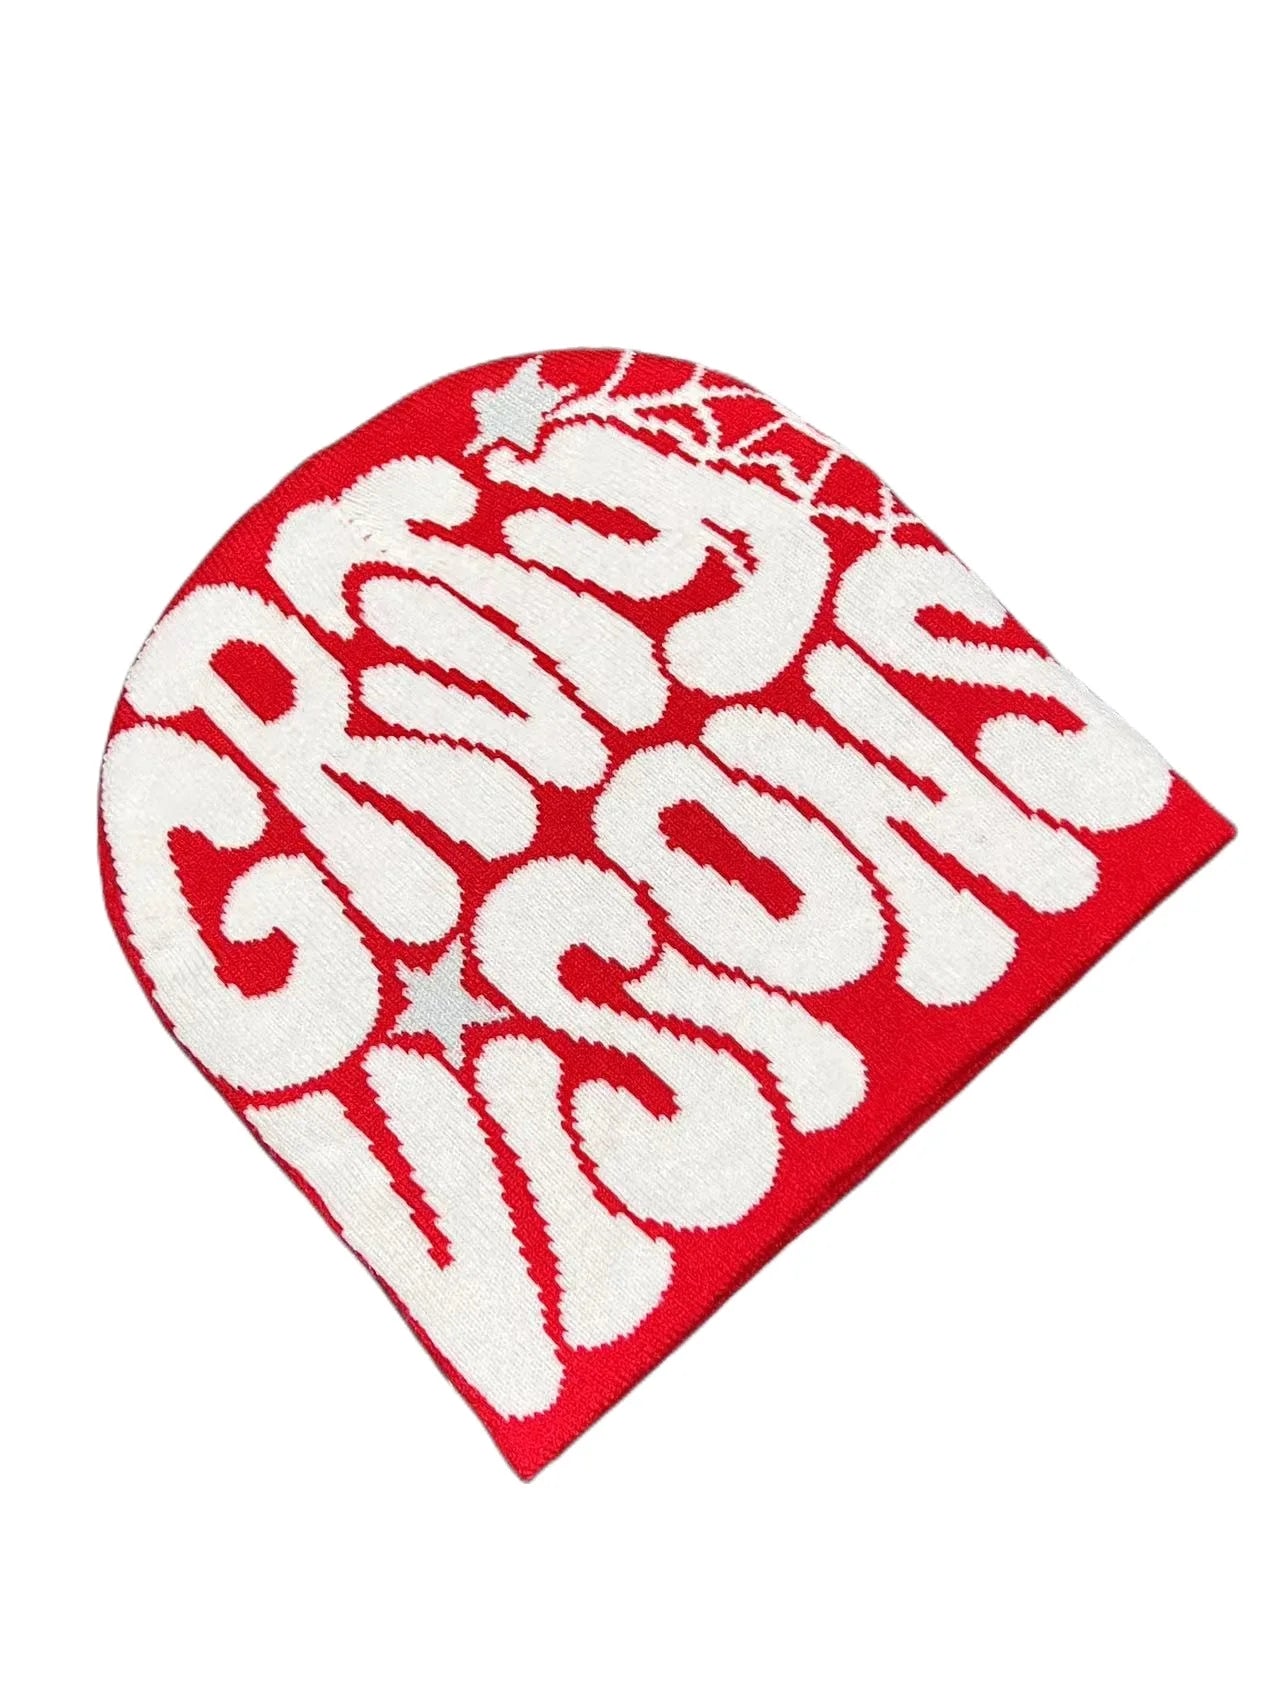 GRVTY visions beanies